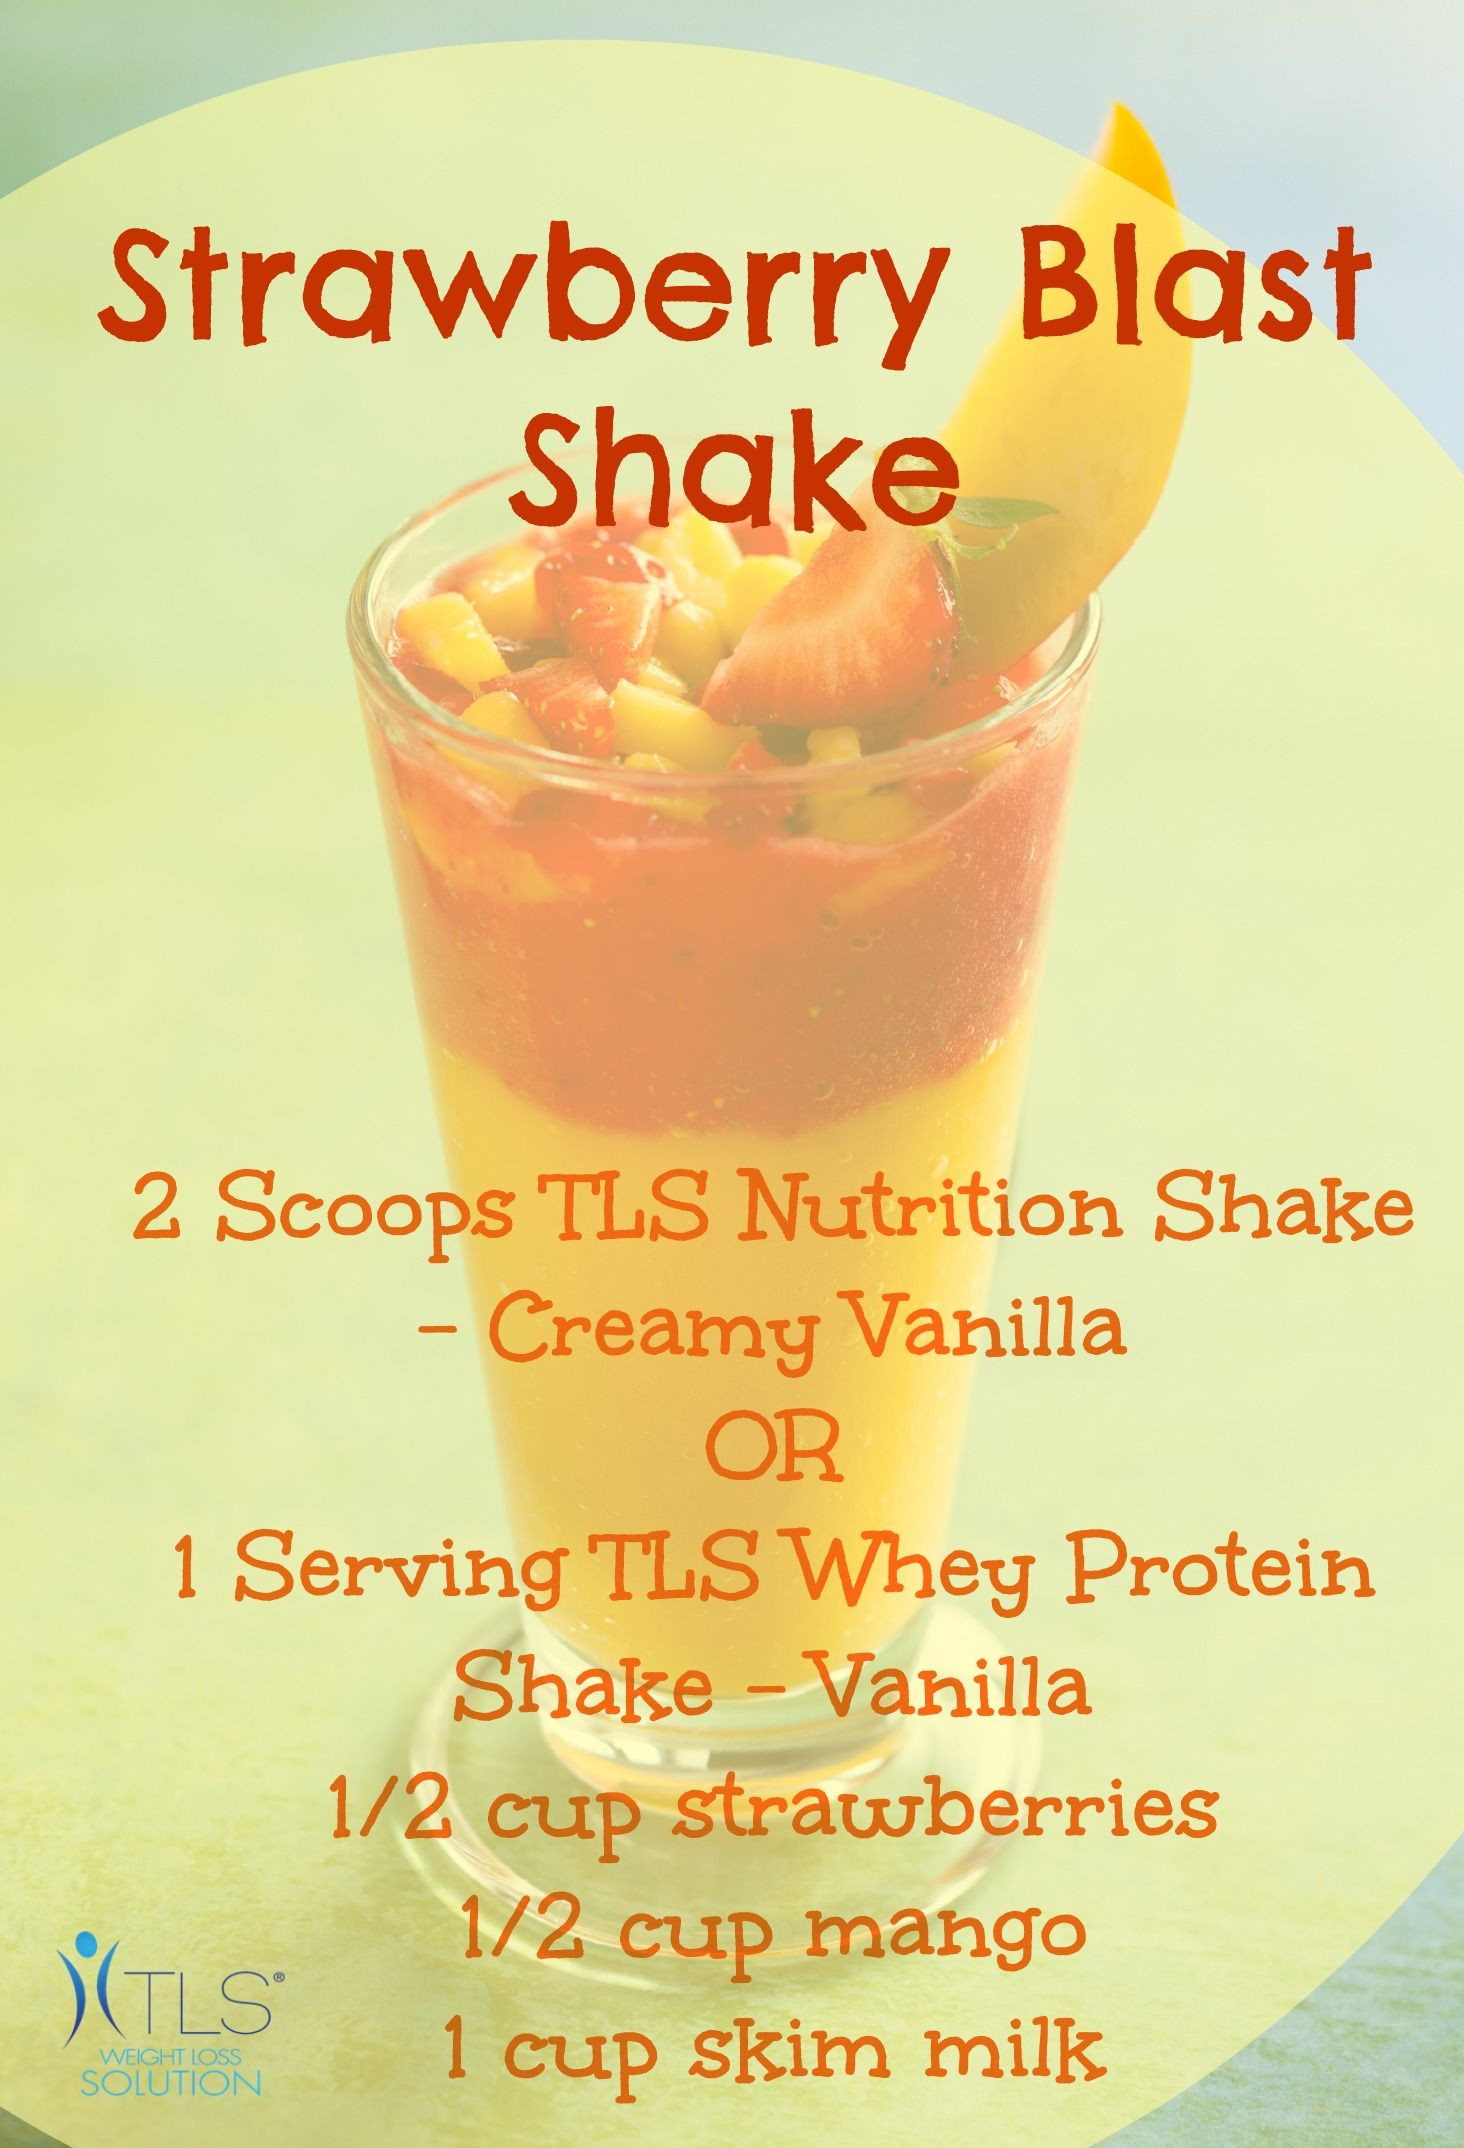 Whey Protein Shake Recipes For Weight Loss
 What a great Summer Treat find your Shake and Whey Protein